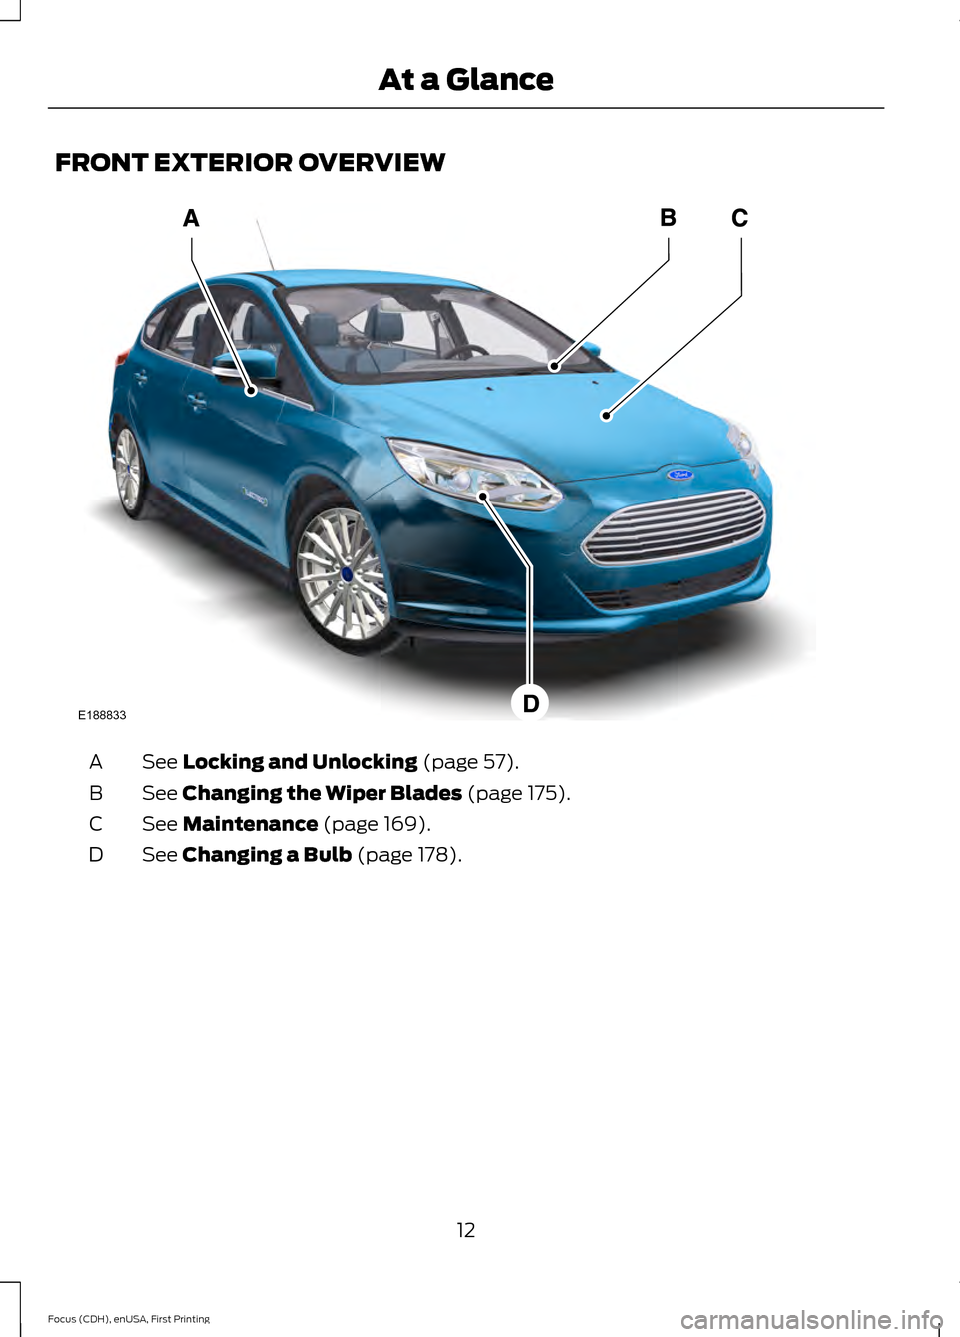 FORD FOCUS ELECTRIC 2015 3.G User Guide FRONT EXTERIOR OVERVIEW
See Locking and Unlocking (page 57).
A
See 
Changing the Wiper Blades (page 175).
B
See 
Maintenance (page 169).
C
See 
Changing a Bulb (page 178).
D
12
Focus (CDH), enUSA, Fir